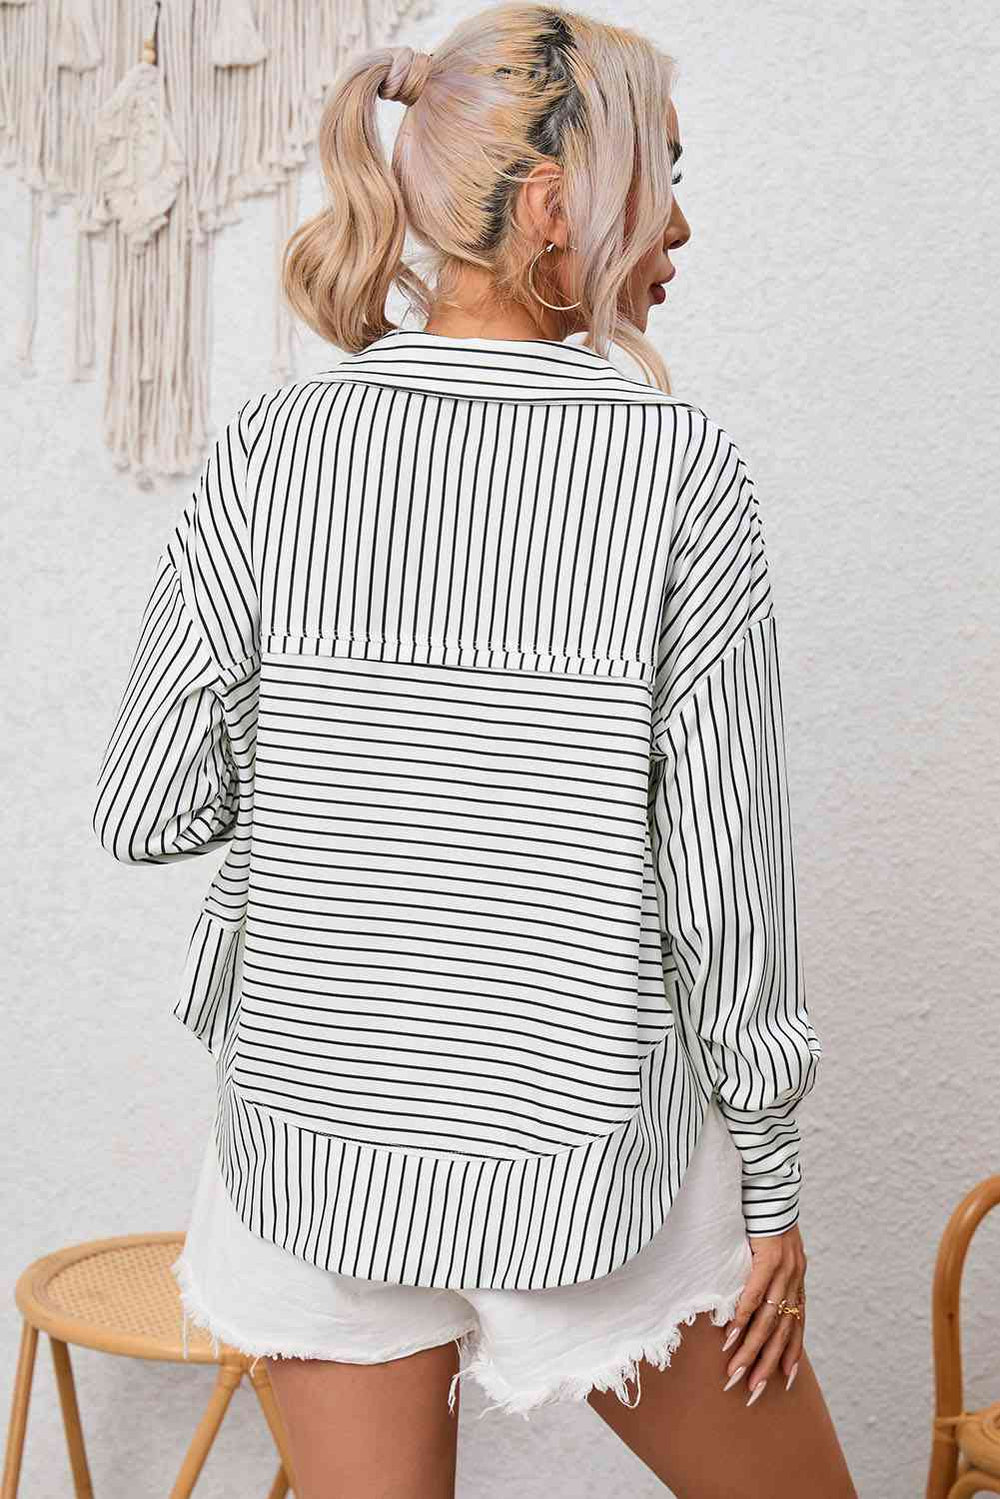 The802Gypsy shirts and tops GYPSY-Striped Collared Top